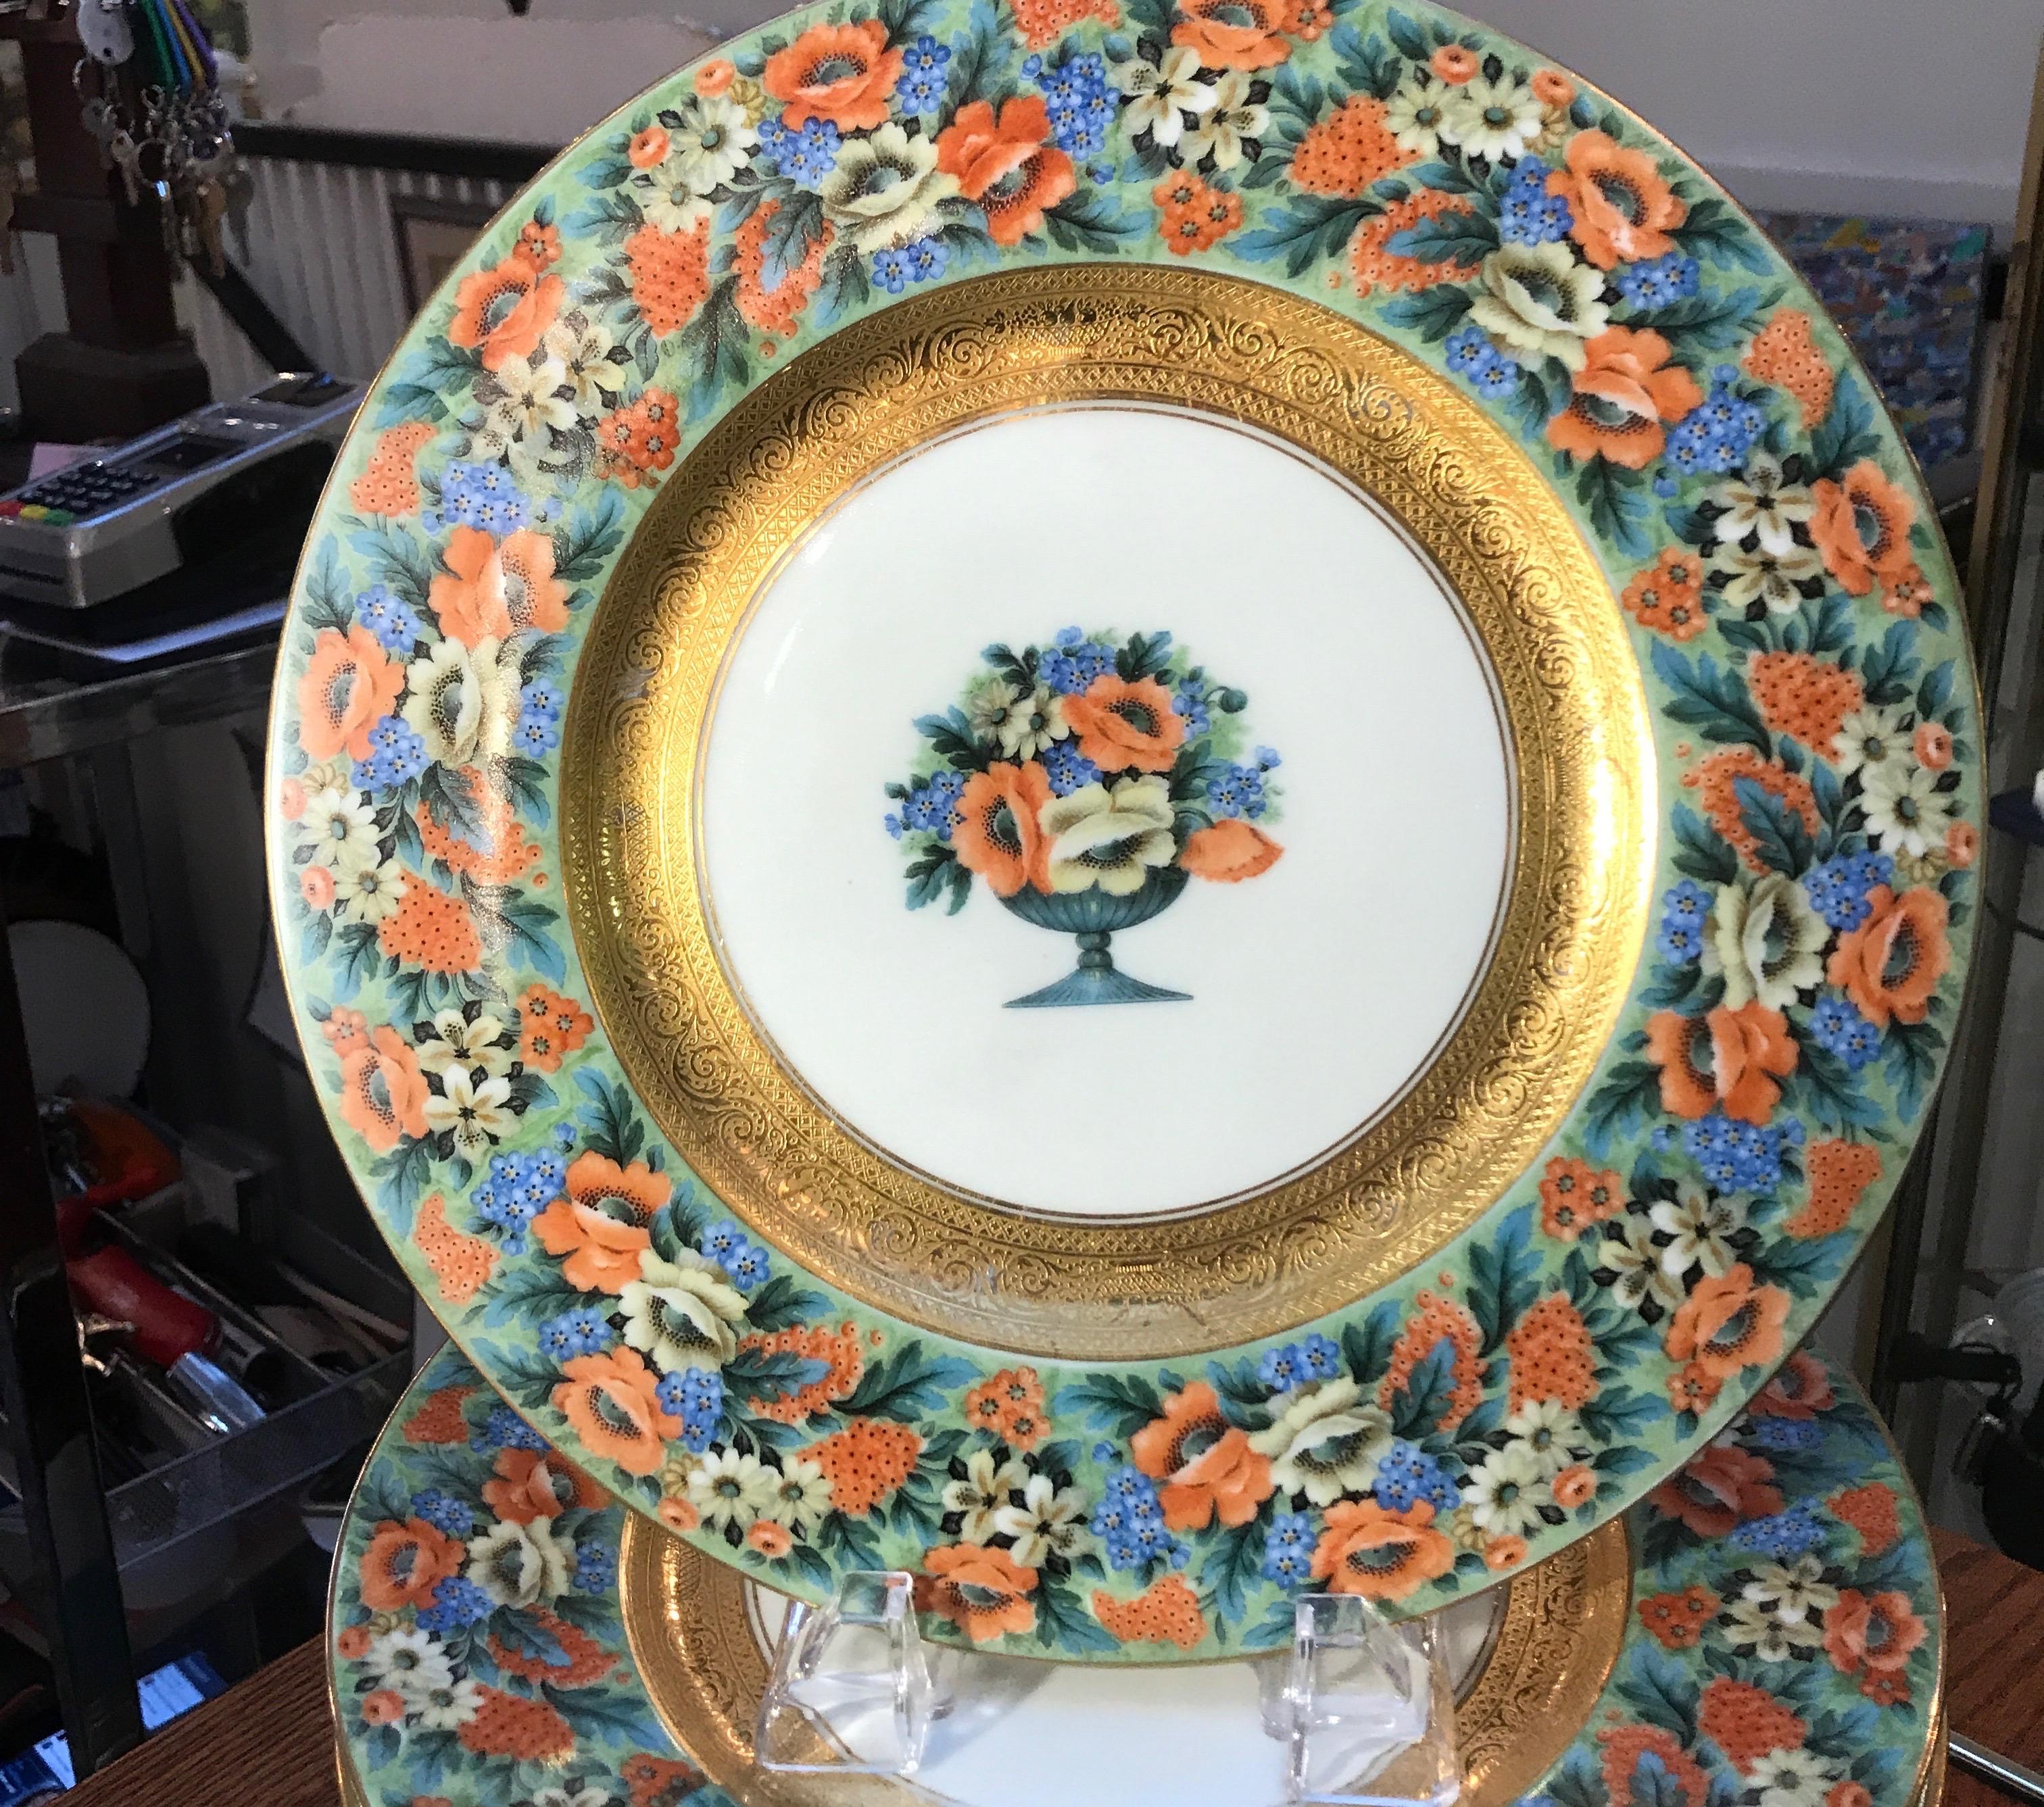 A beautiful set of broad floral band service plates with gilt decoration. The elaborate floral borders with central urn and floral medallion in German porcelain, circa 1930. By Black Knight, Hutchenreuther 